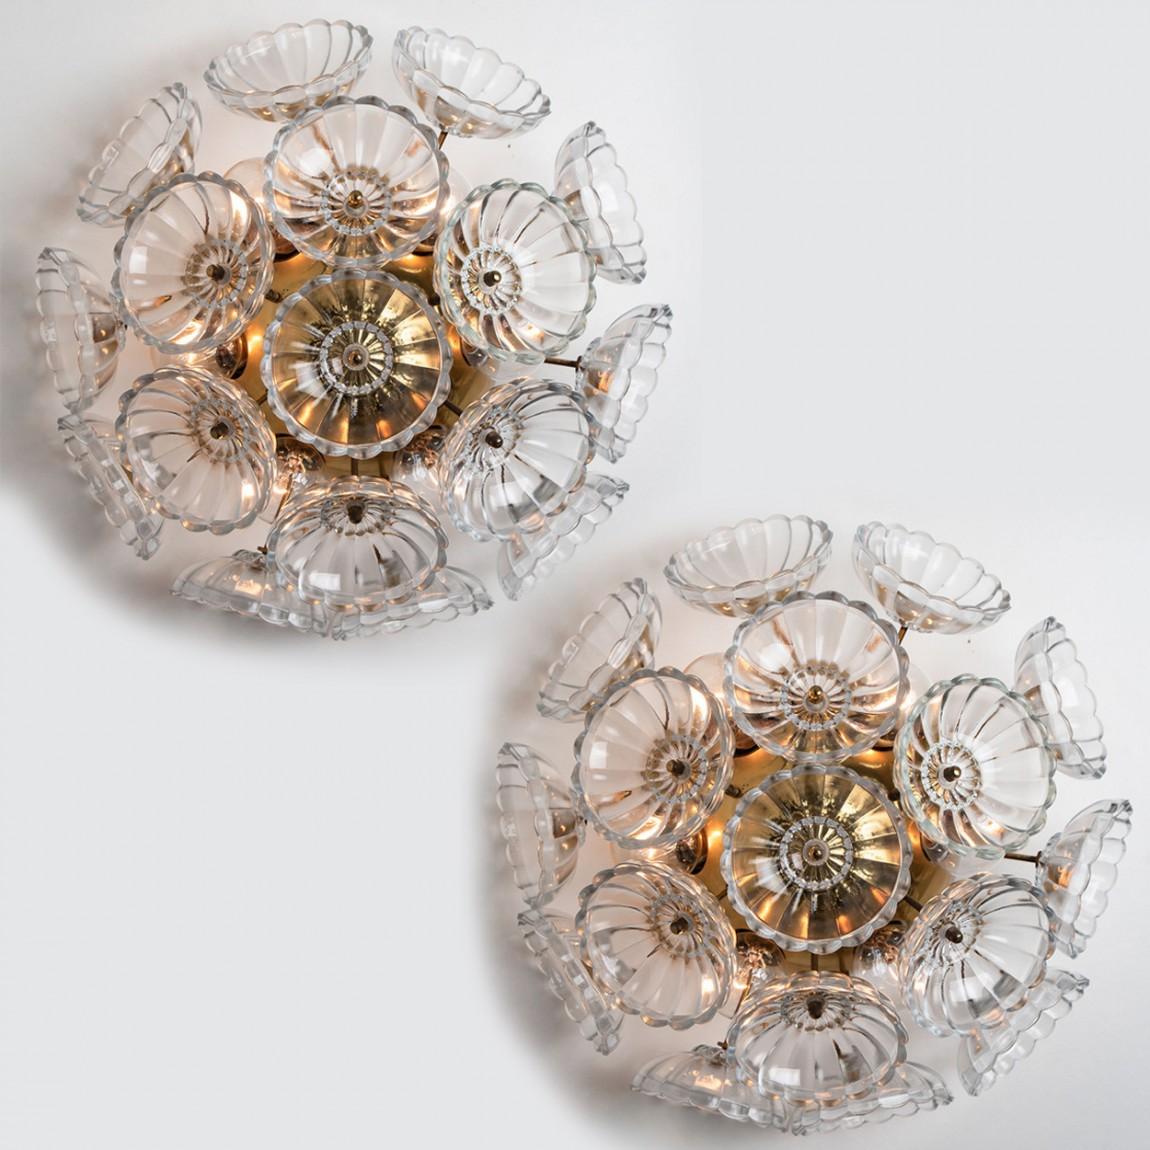 Two eye-catching floral glass and brass wall lights by Emil Stejnar, manufactured in the 1960s in Austria.
The heavy clear glass flowers are mounted on a brass sputnik frame.
The glass pieces are beautifully cut with a fine eye for detail, all